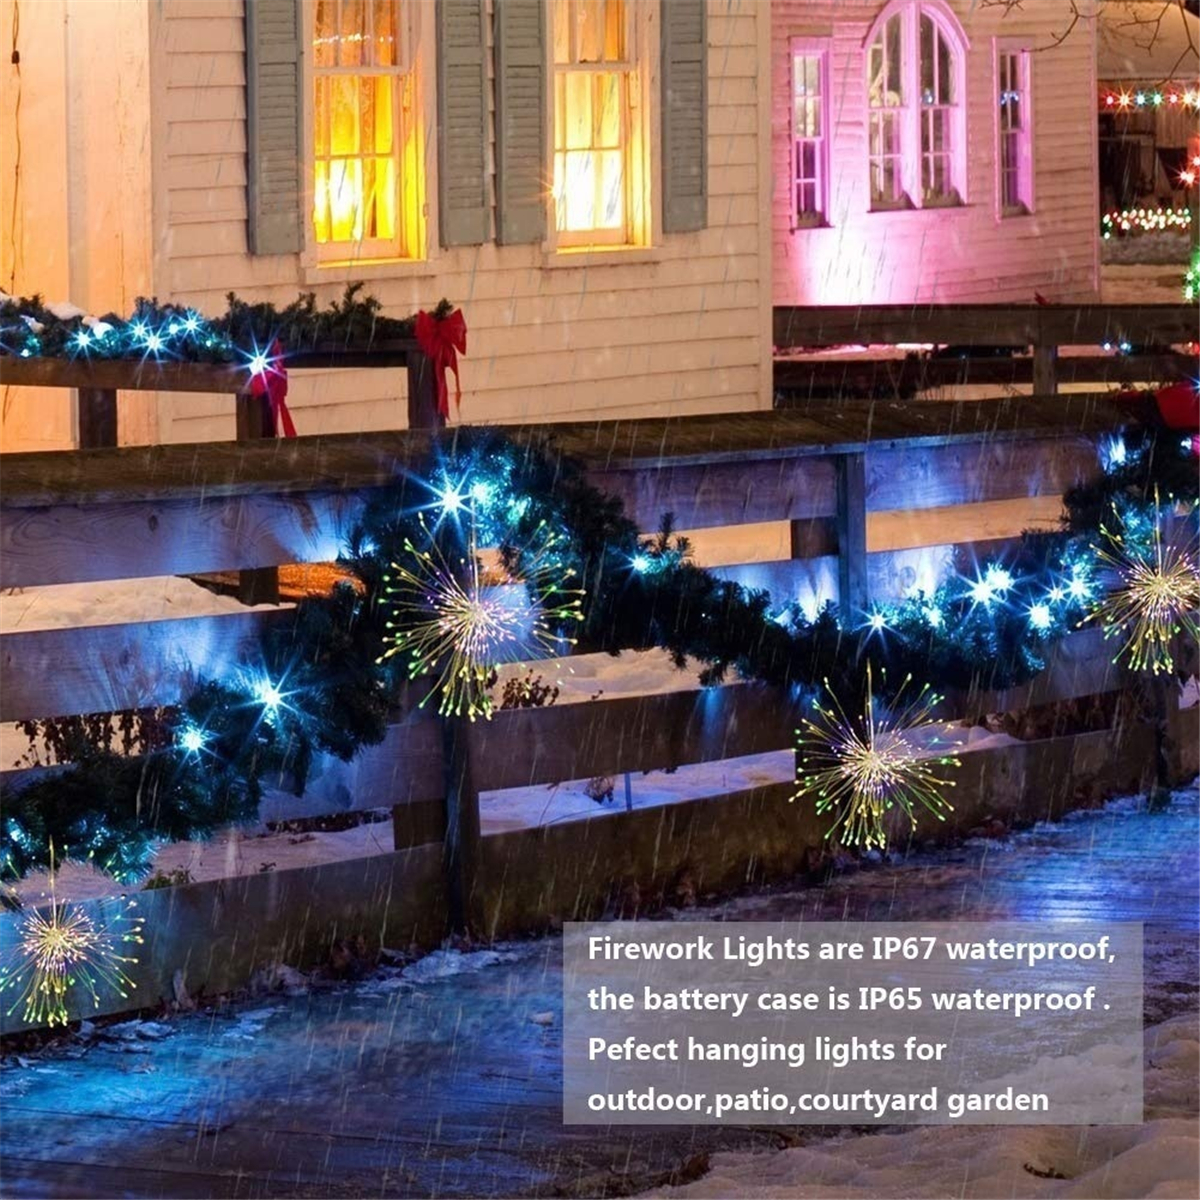 100200-LED-Firework-Light-8-Mode-Fairy-String-Lamp-with-Remote-Control-for-Home-Garden-Decor-1678624-1